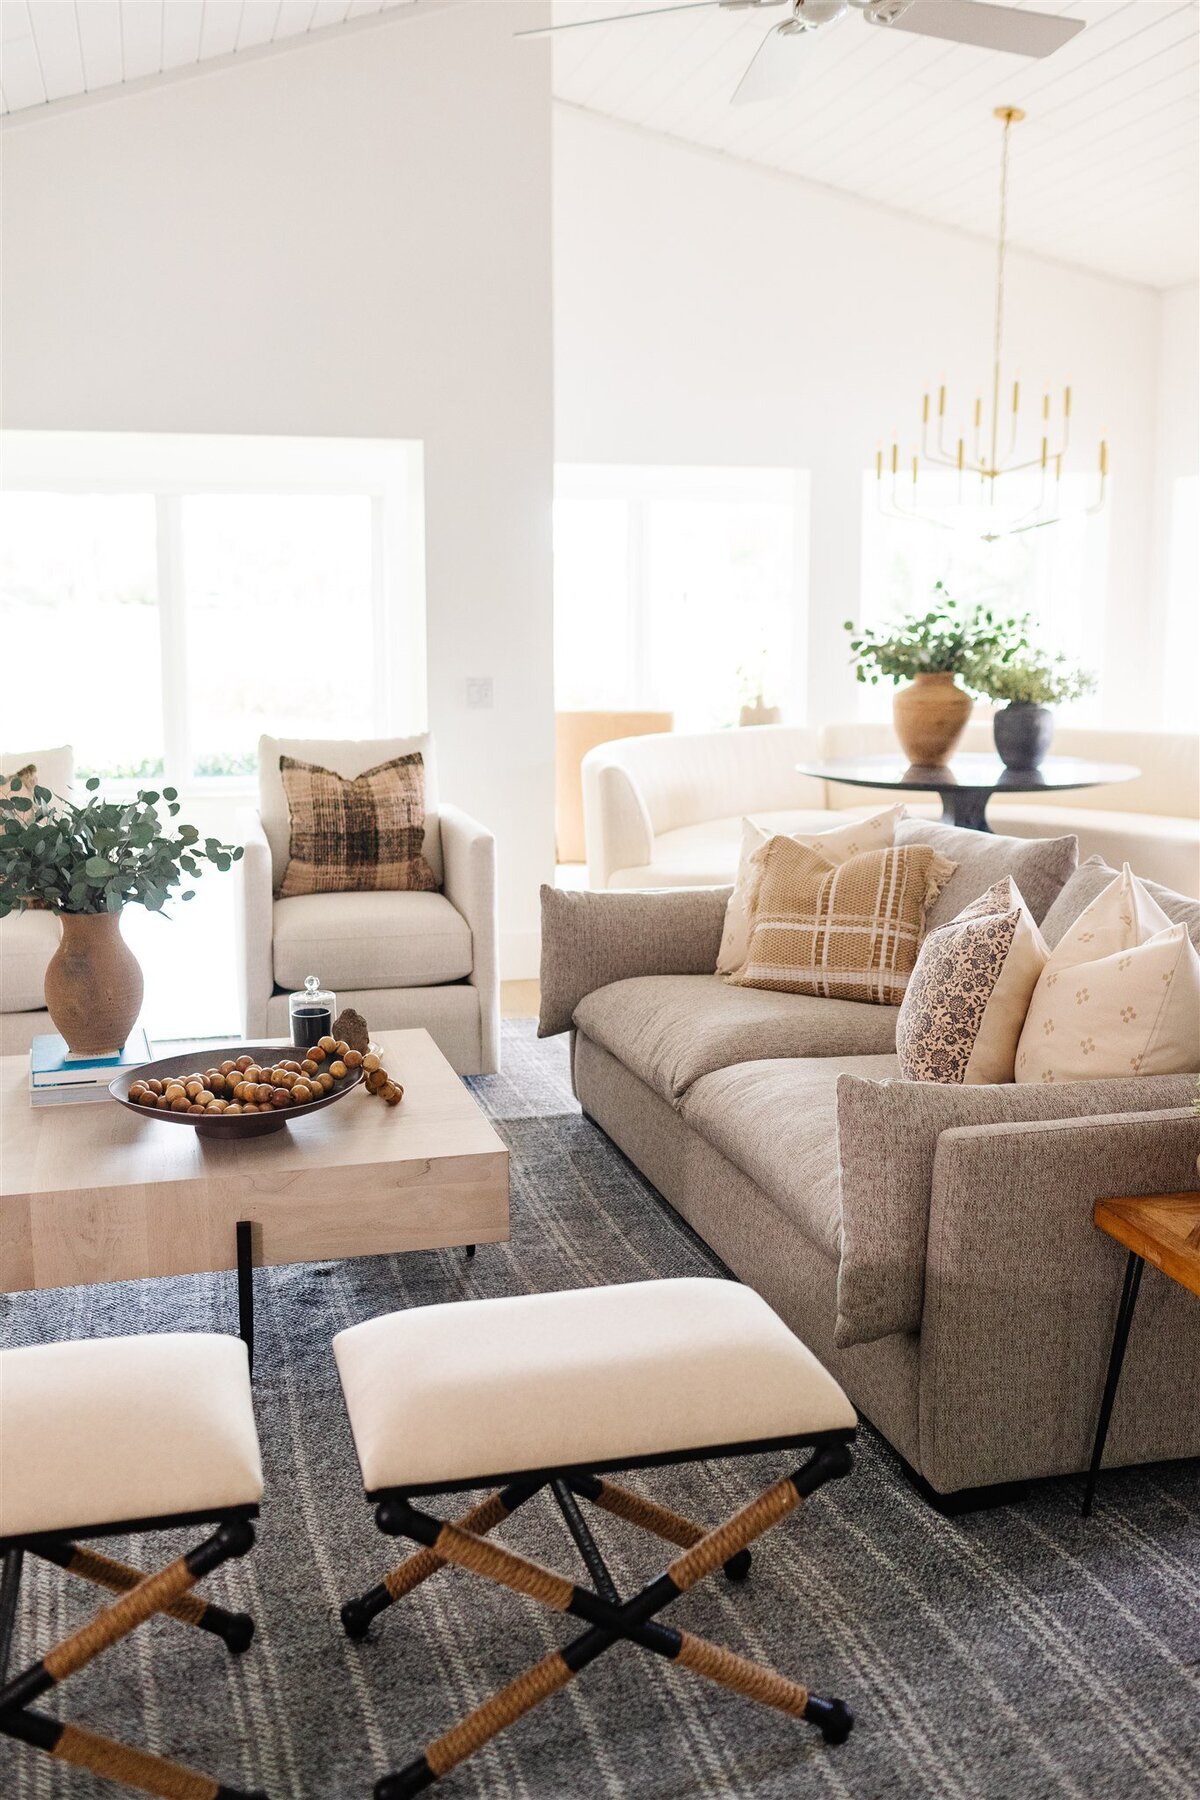 Living room with neutral and brown accents